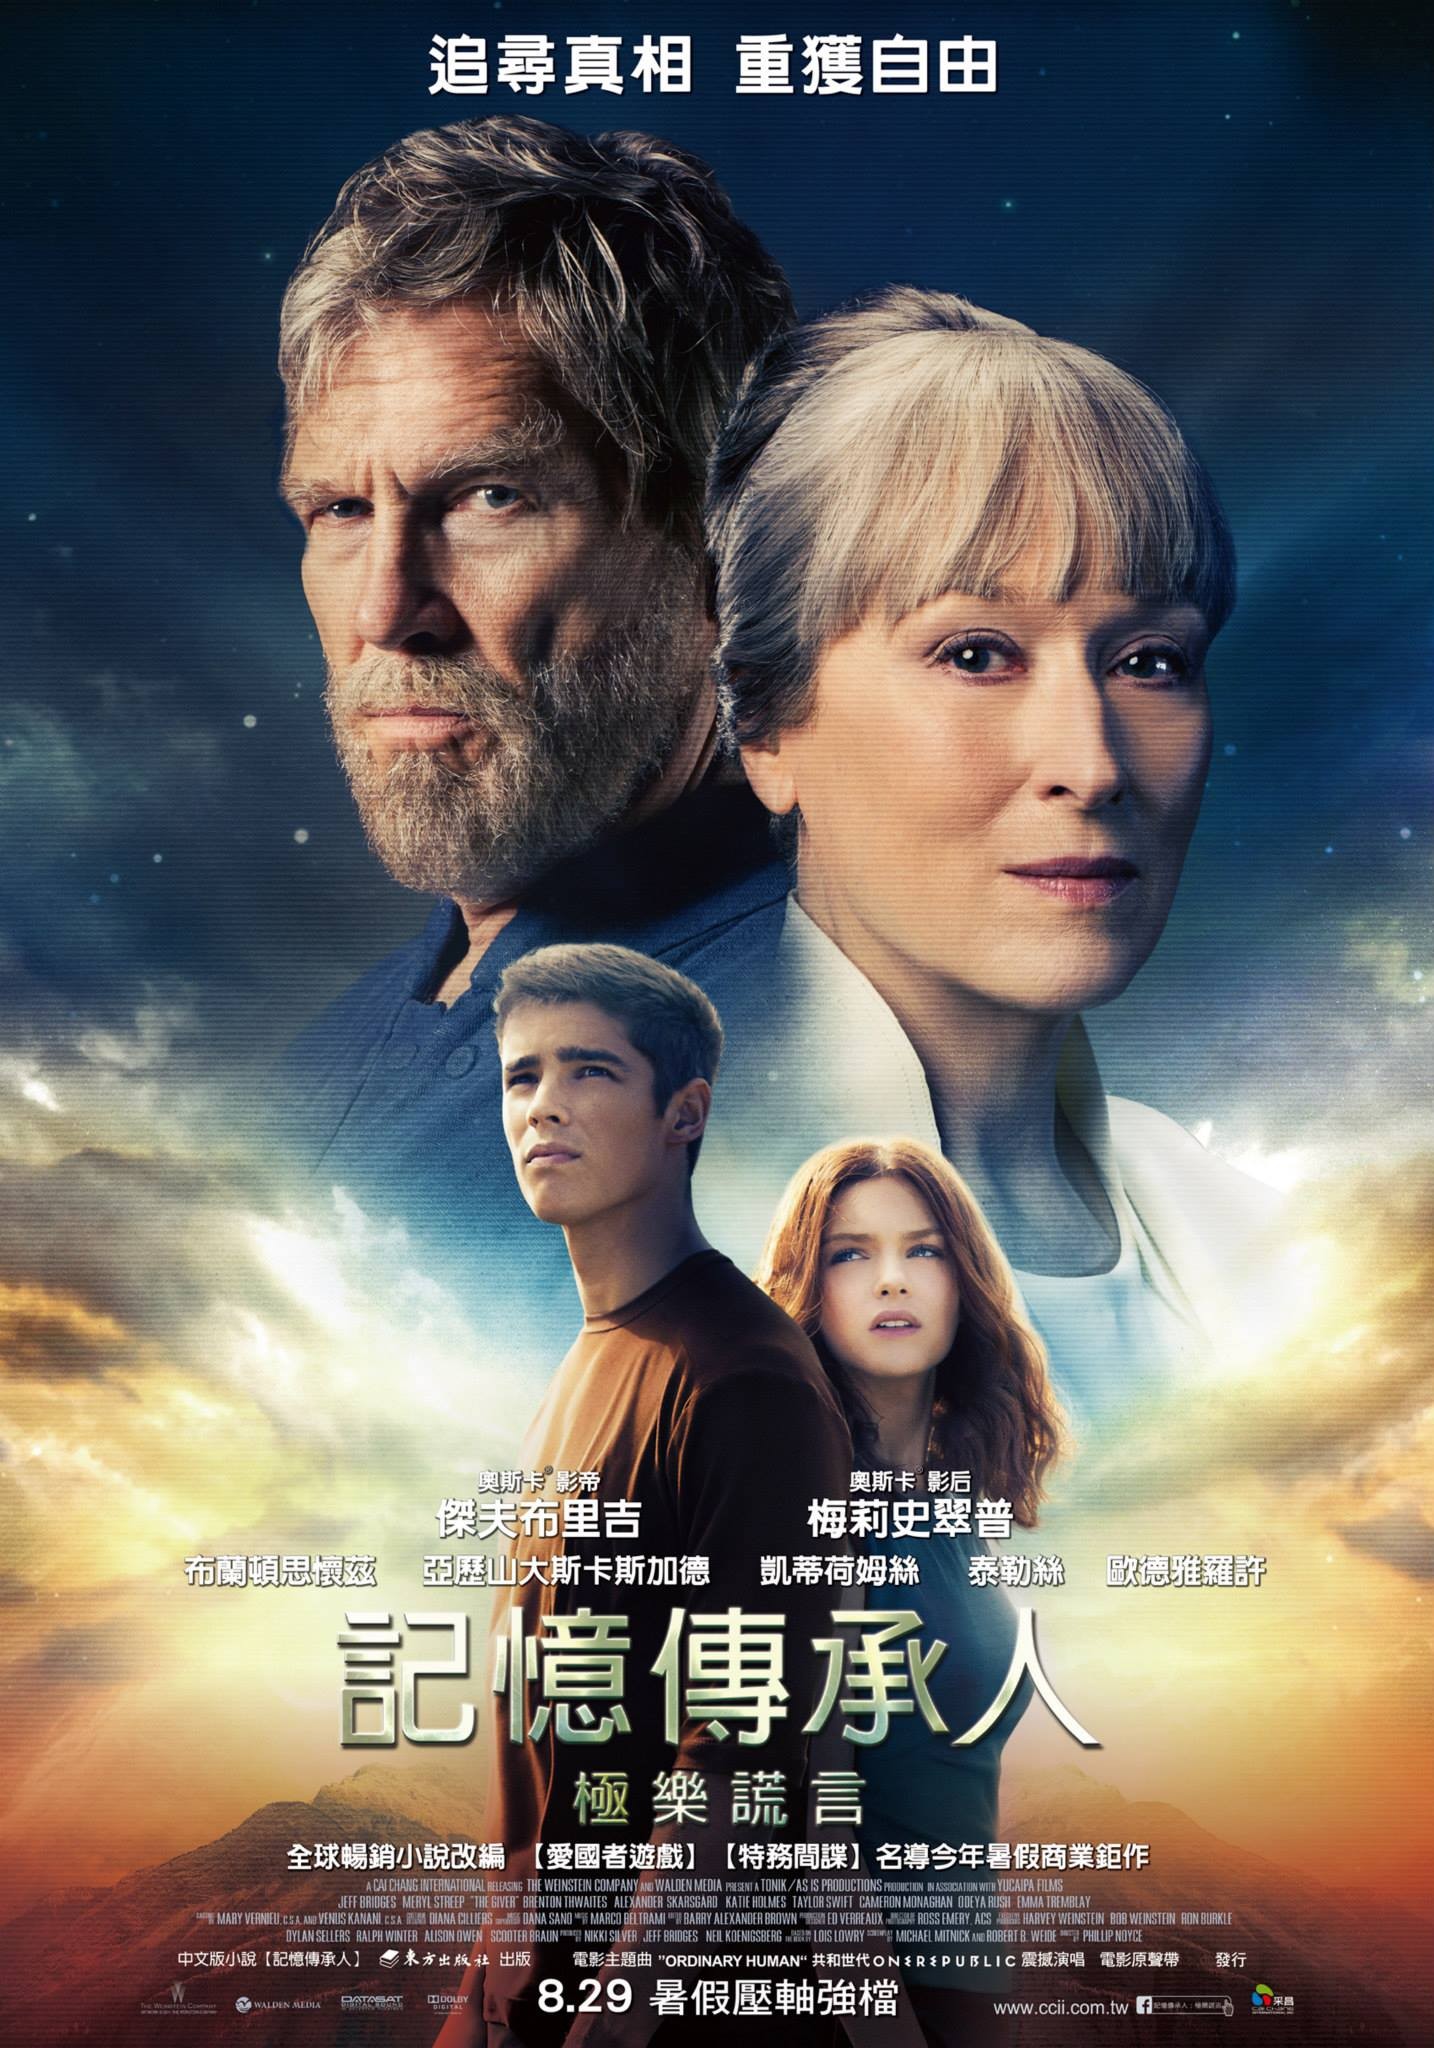 Mega Sized Movie Poster Image for The Giver (#10 of 13)